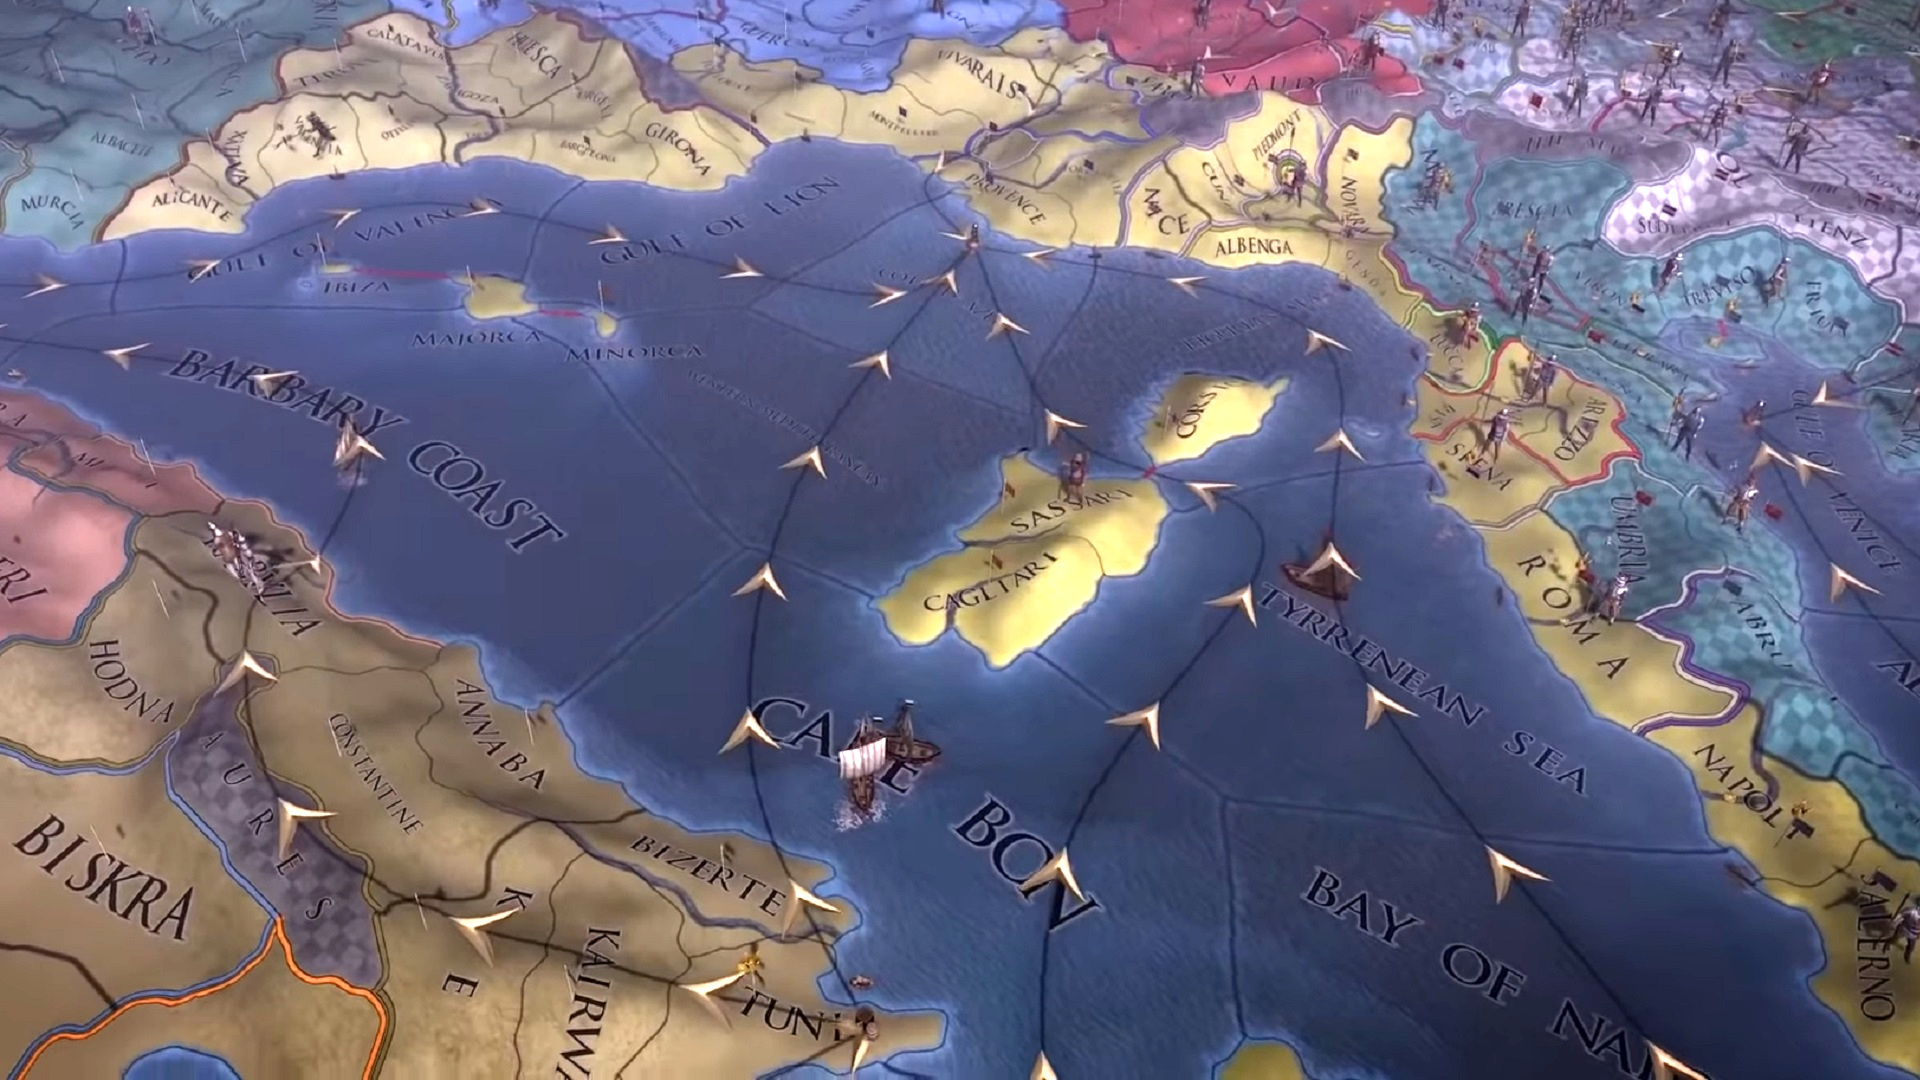 EU4 player maps out the strategy game's trade nodes to show which is better